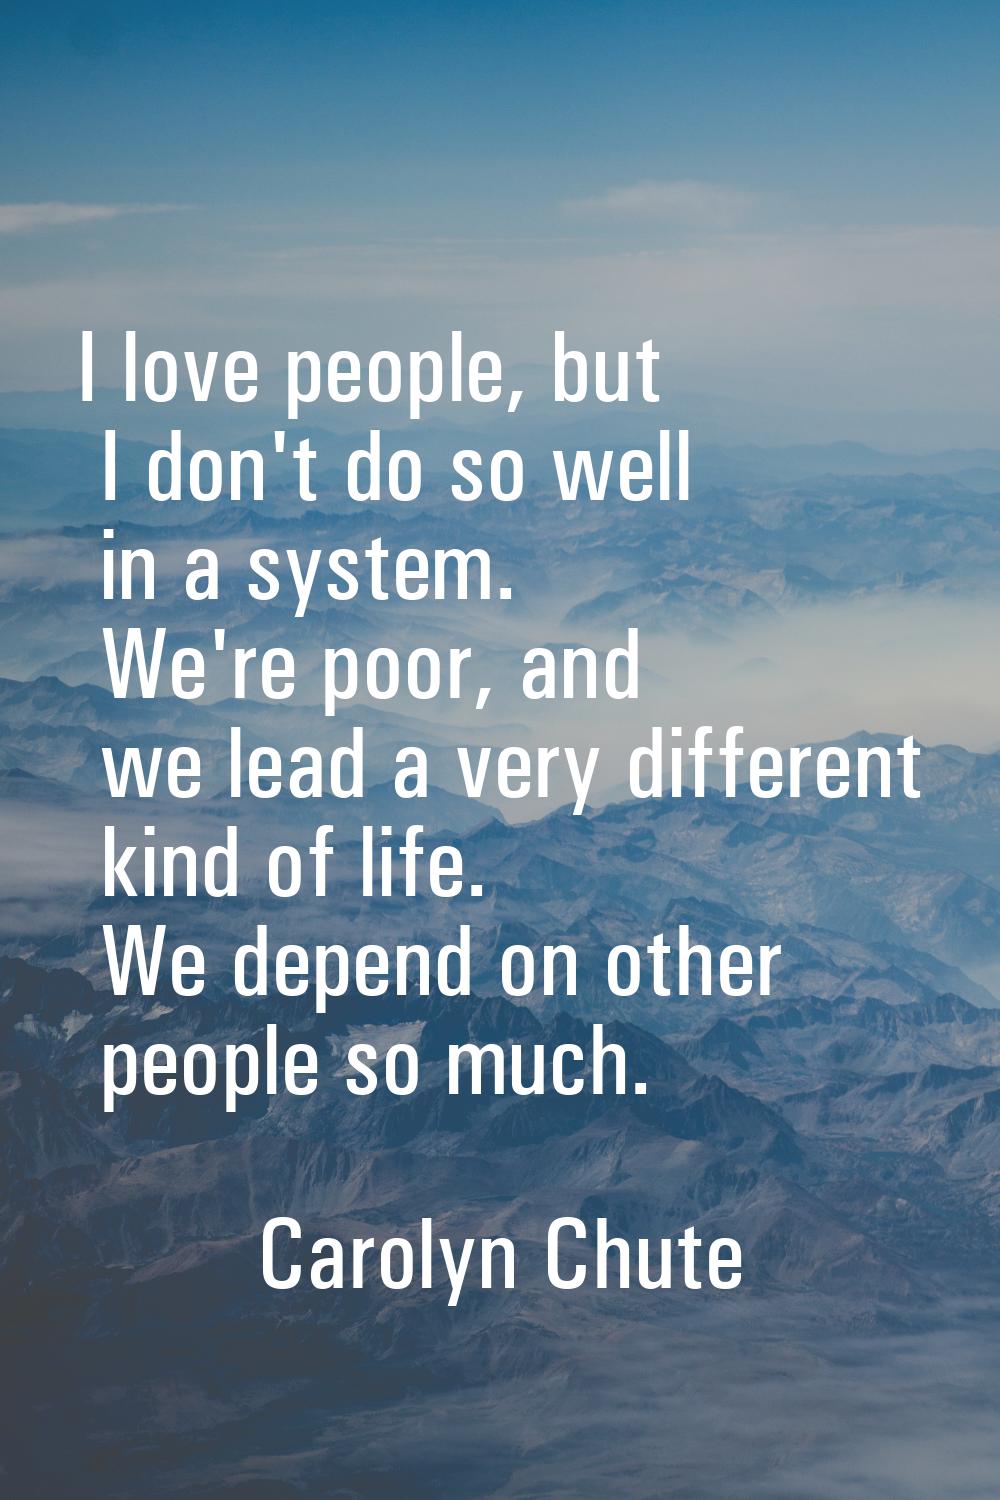 I love people, but I don't do so well in a system. We're poor, and we lead a very different kind of